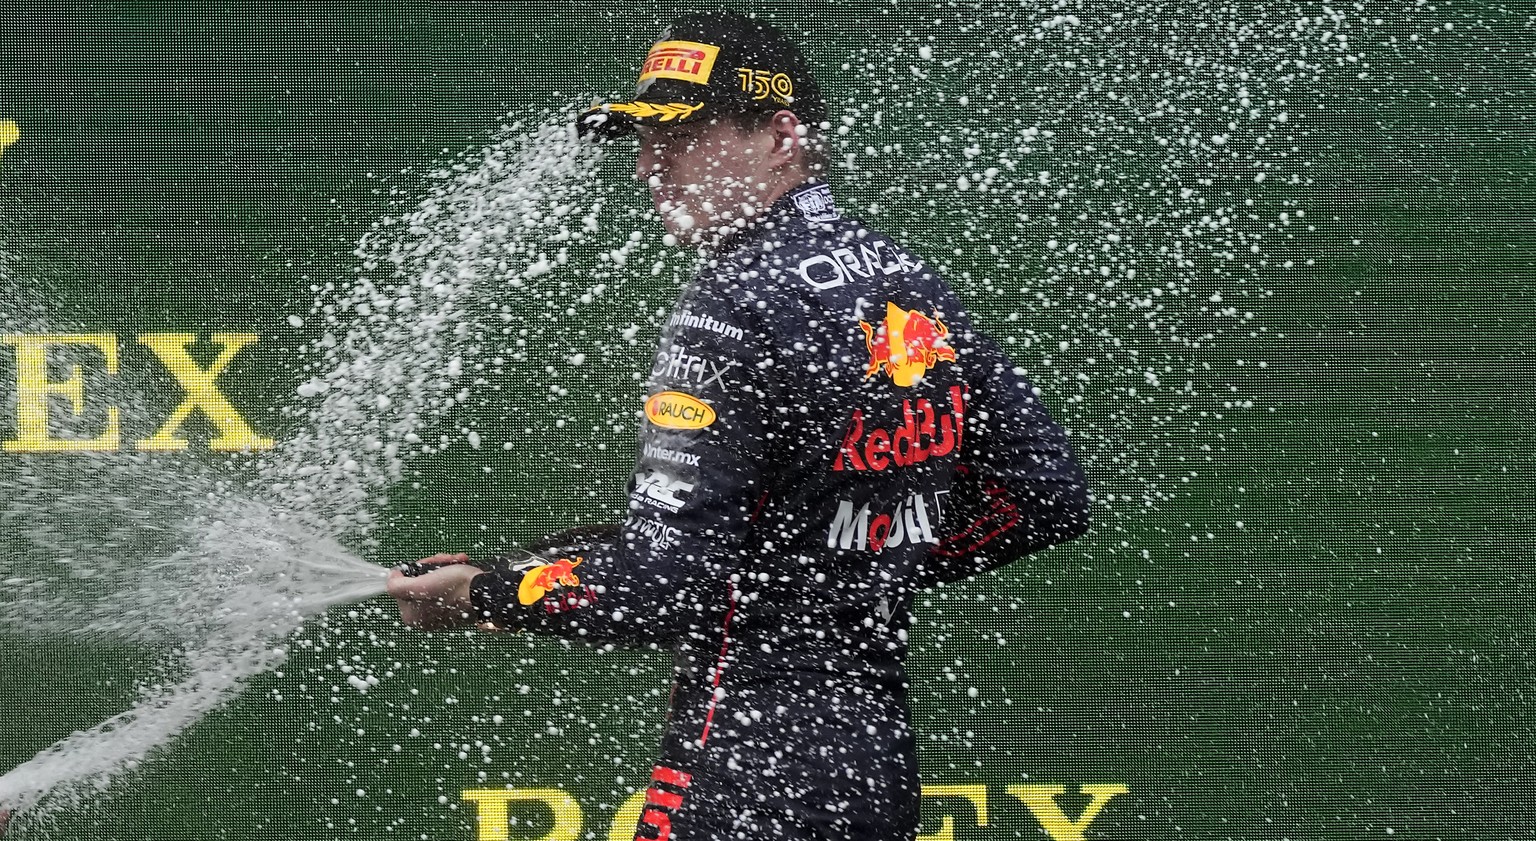 Red Bull driver Max Verstappen, of the Netherlands, celebrates on the podium after winning the Emilia Romagna Formula One Grand Prix, at the Enzo and Dino Ferrari racetrack, in Imola, Italy, Sunday, A ...